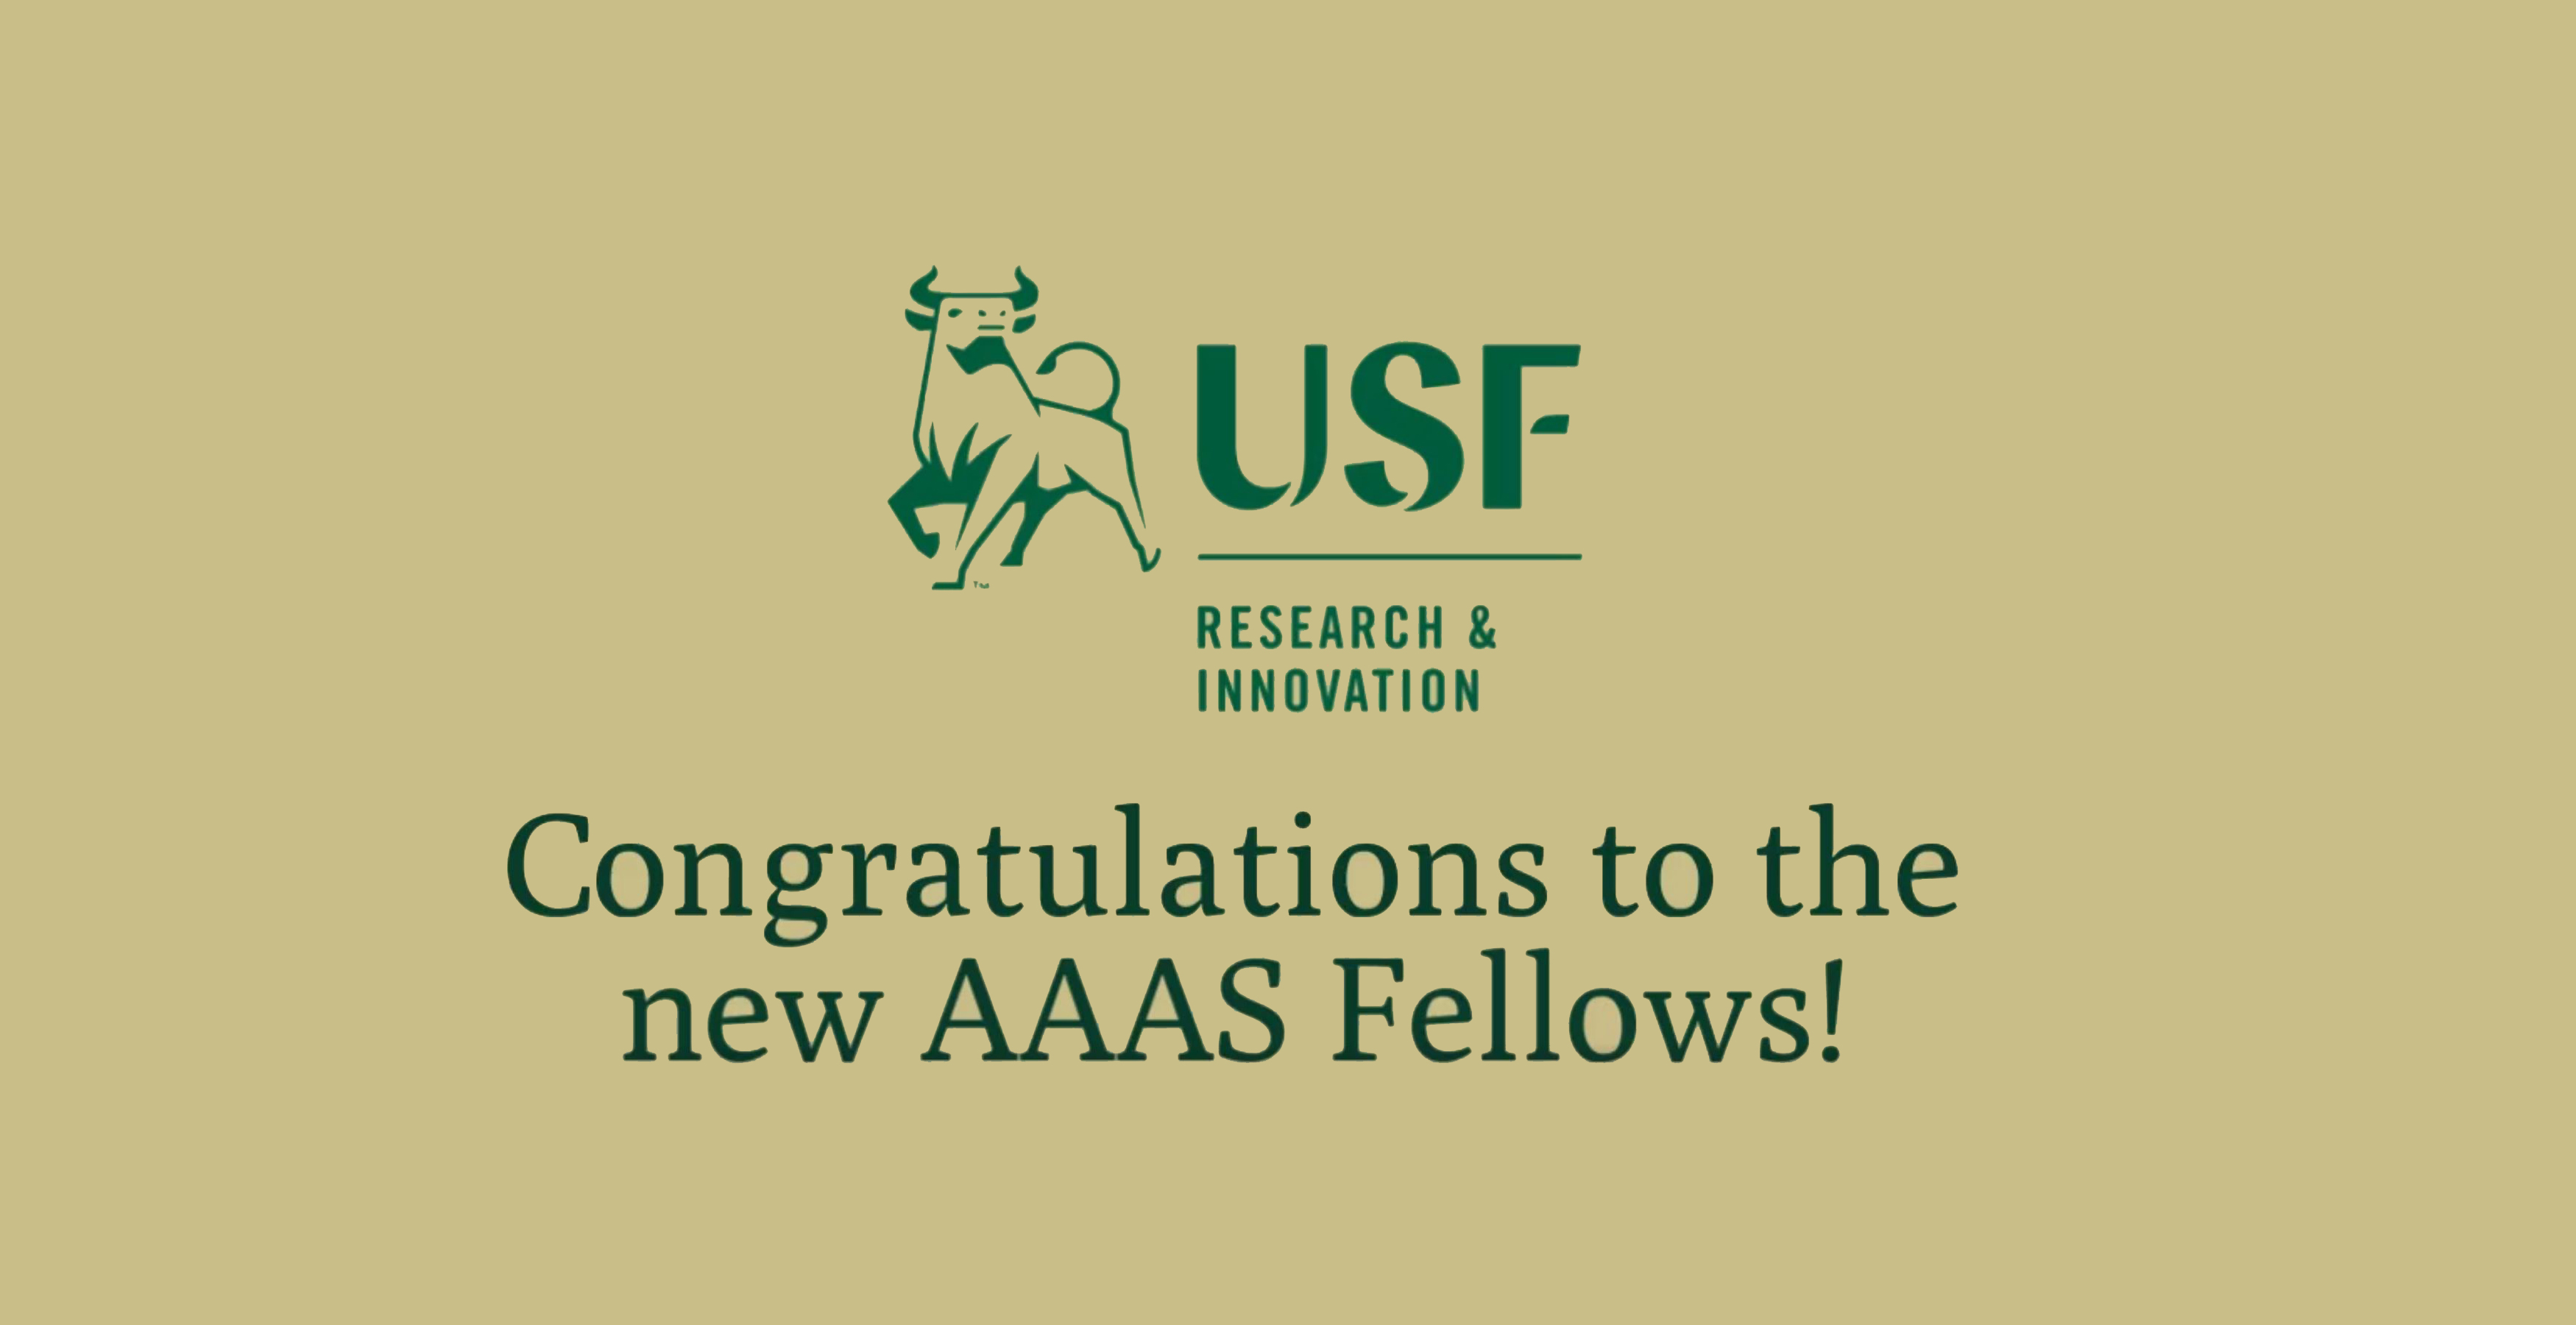 Eight USF Faculty Members Named New AAAS Fellows.